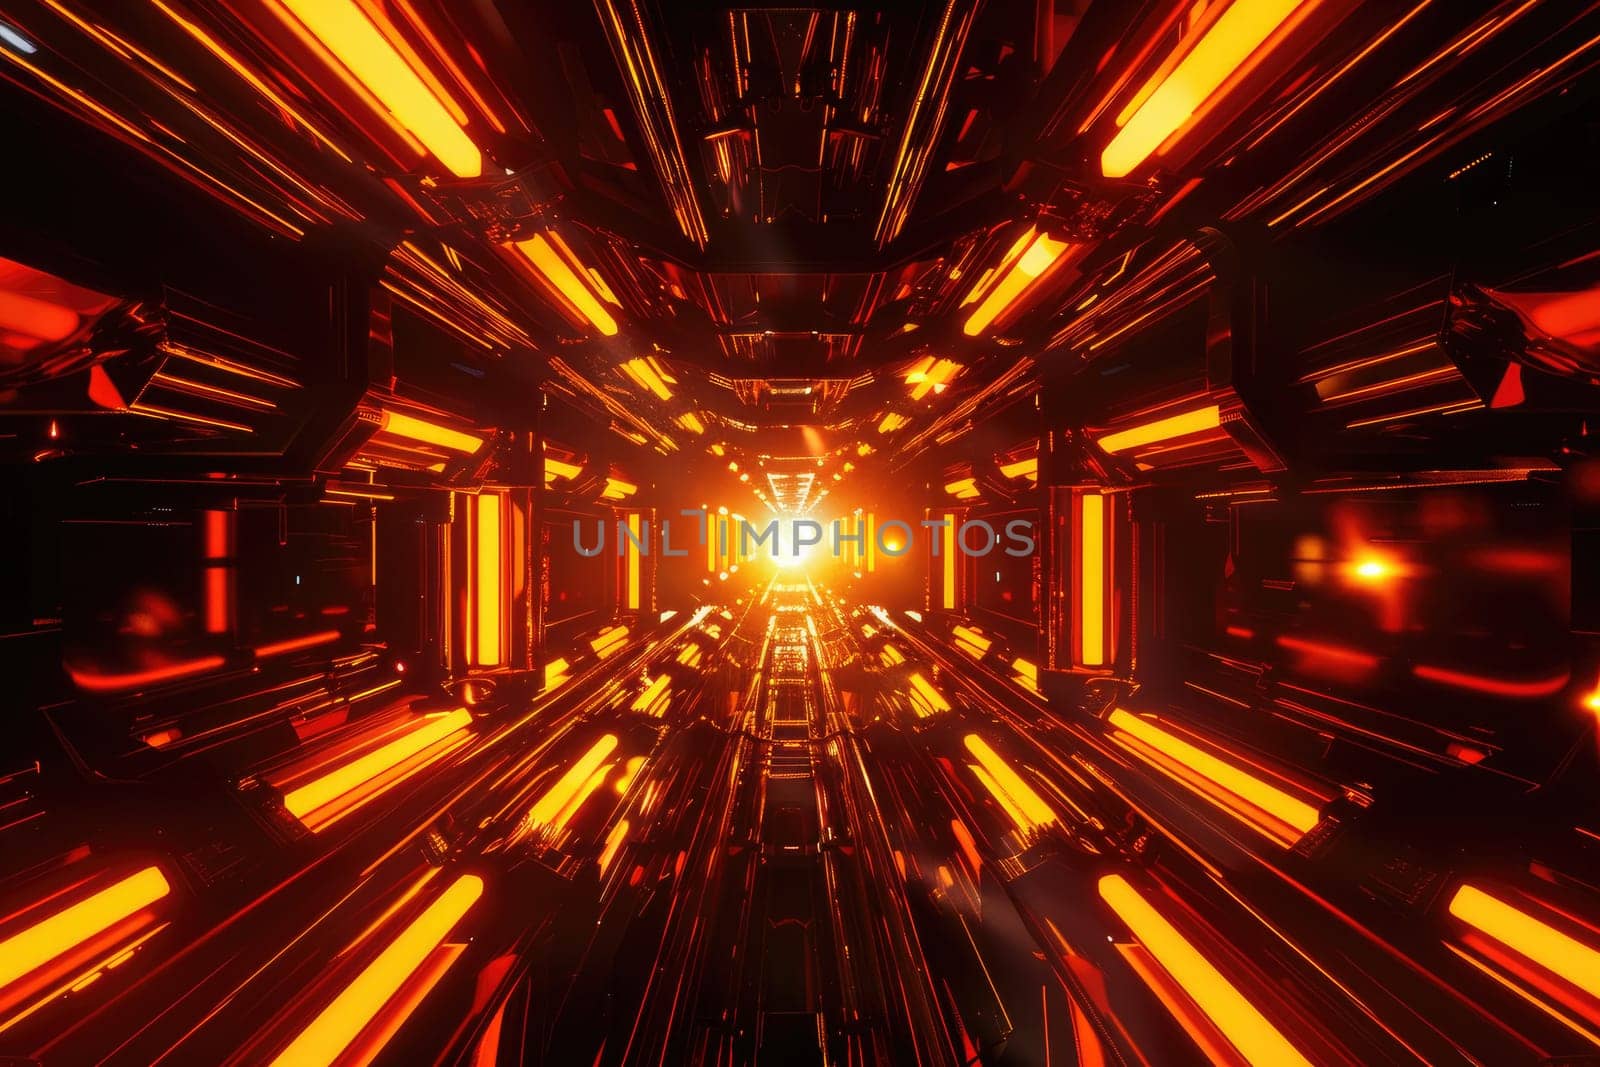 Abstract 3D space with glowing orange rays cutting through the darkness. Create a futuristic by AI generated image.